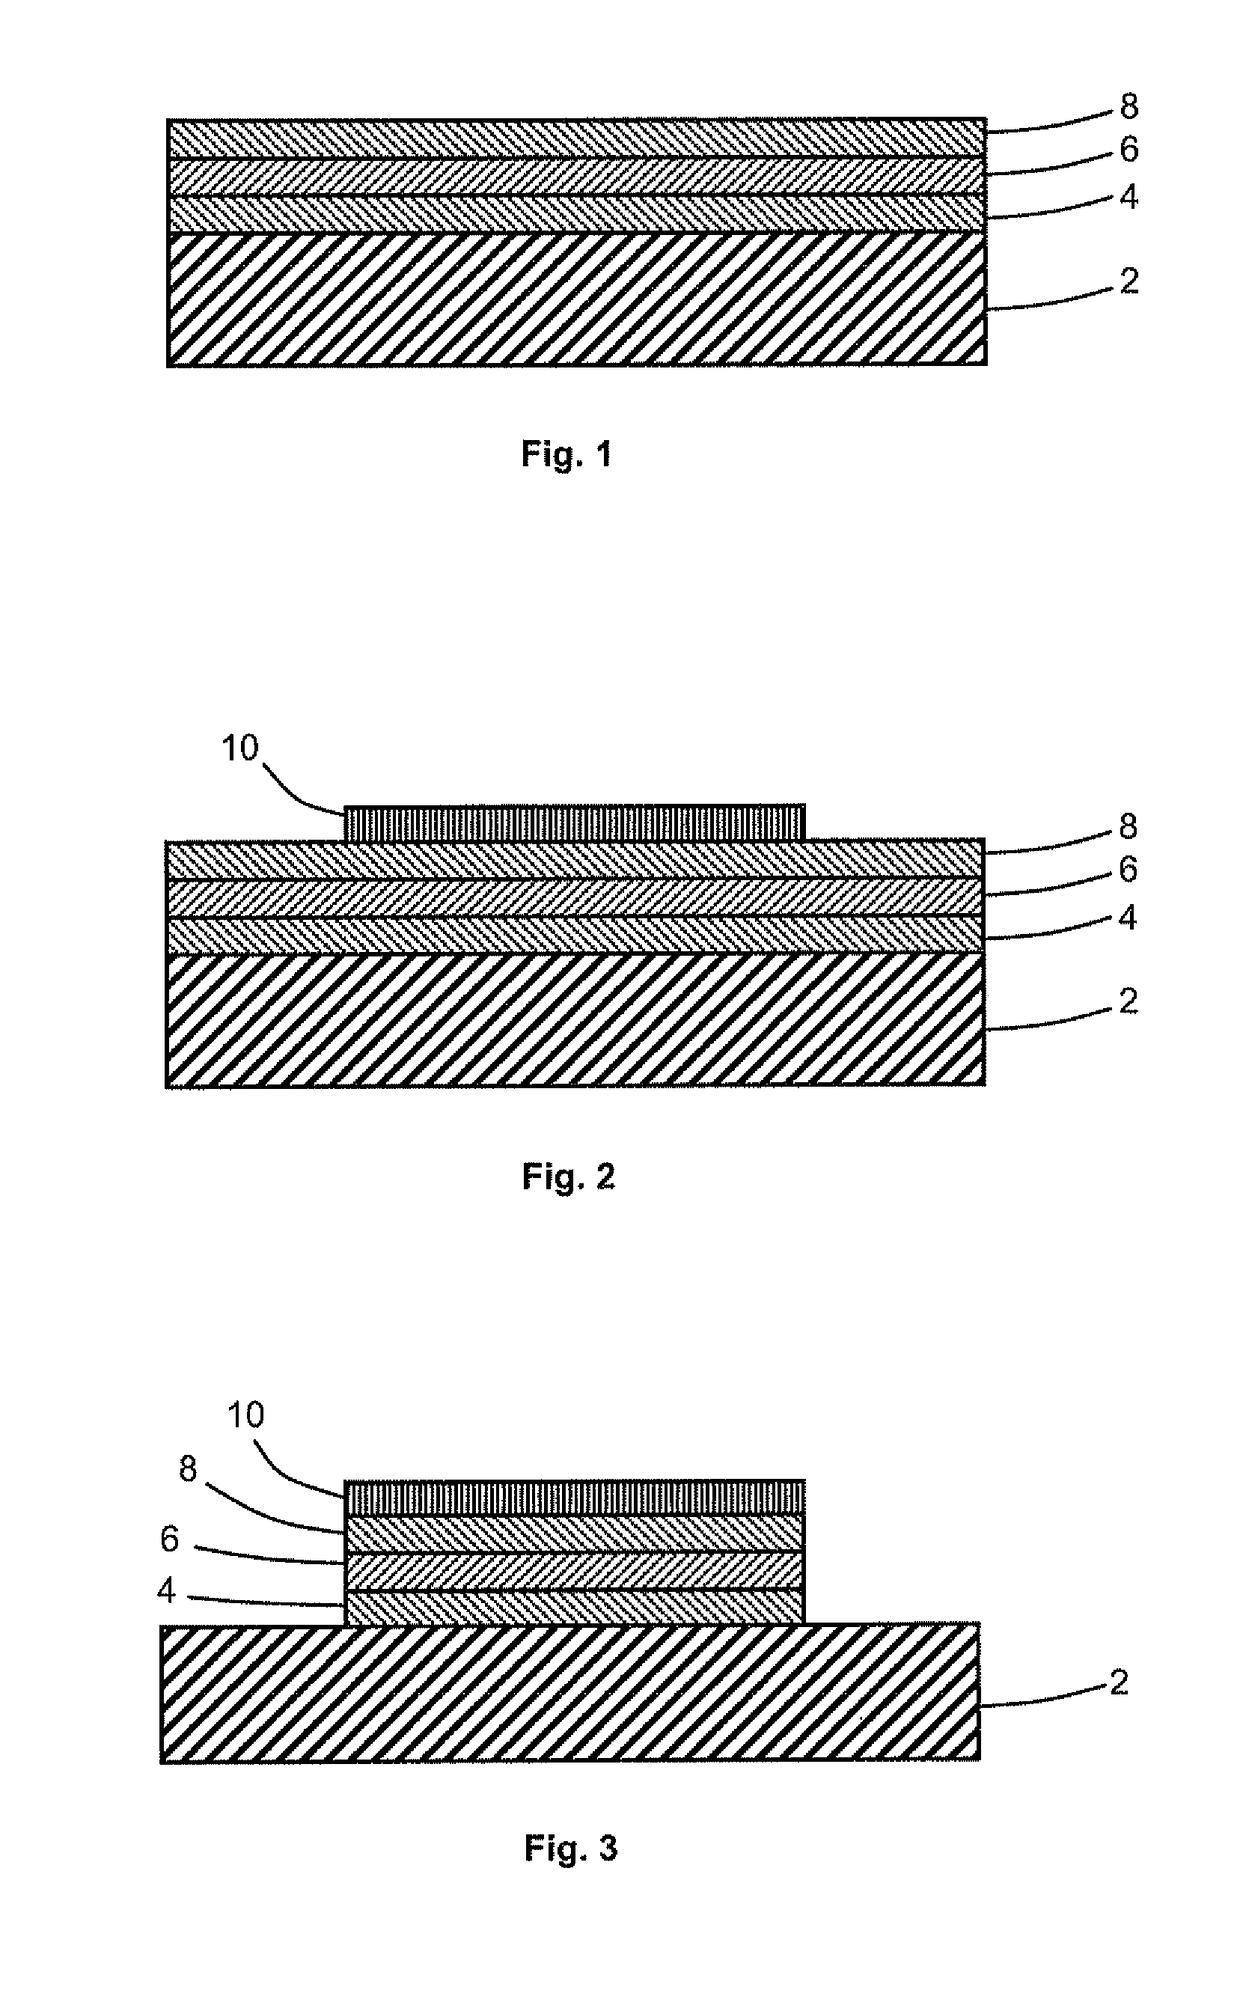 Method for forming a multilayer structure